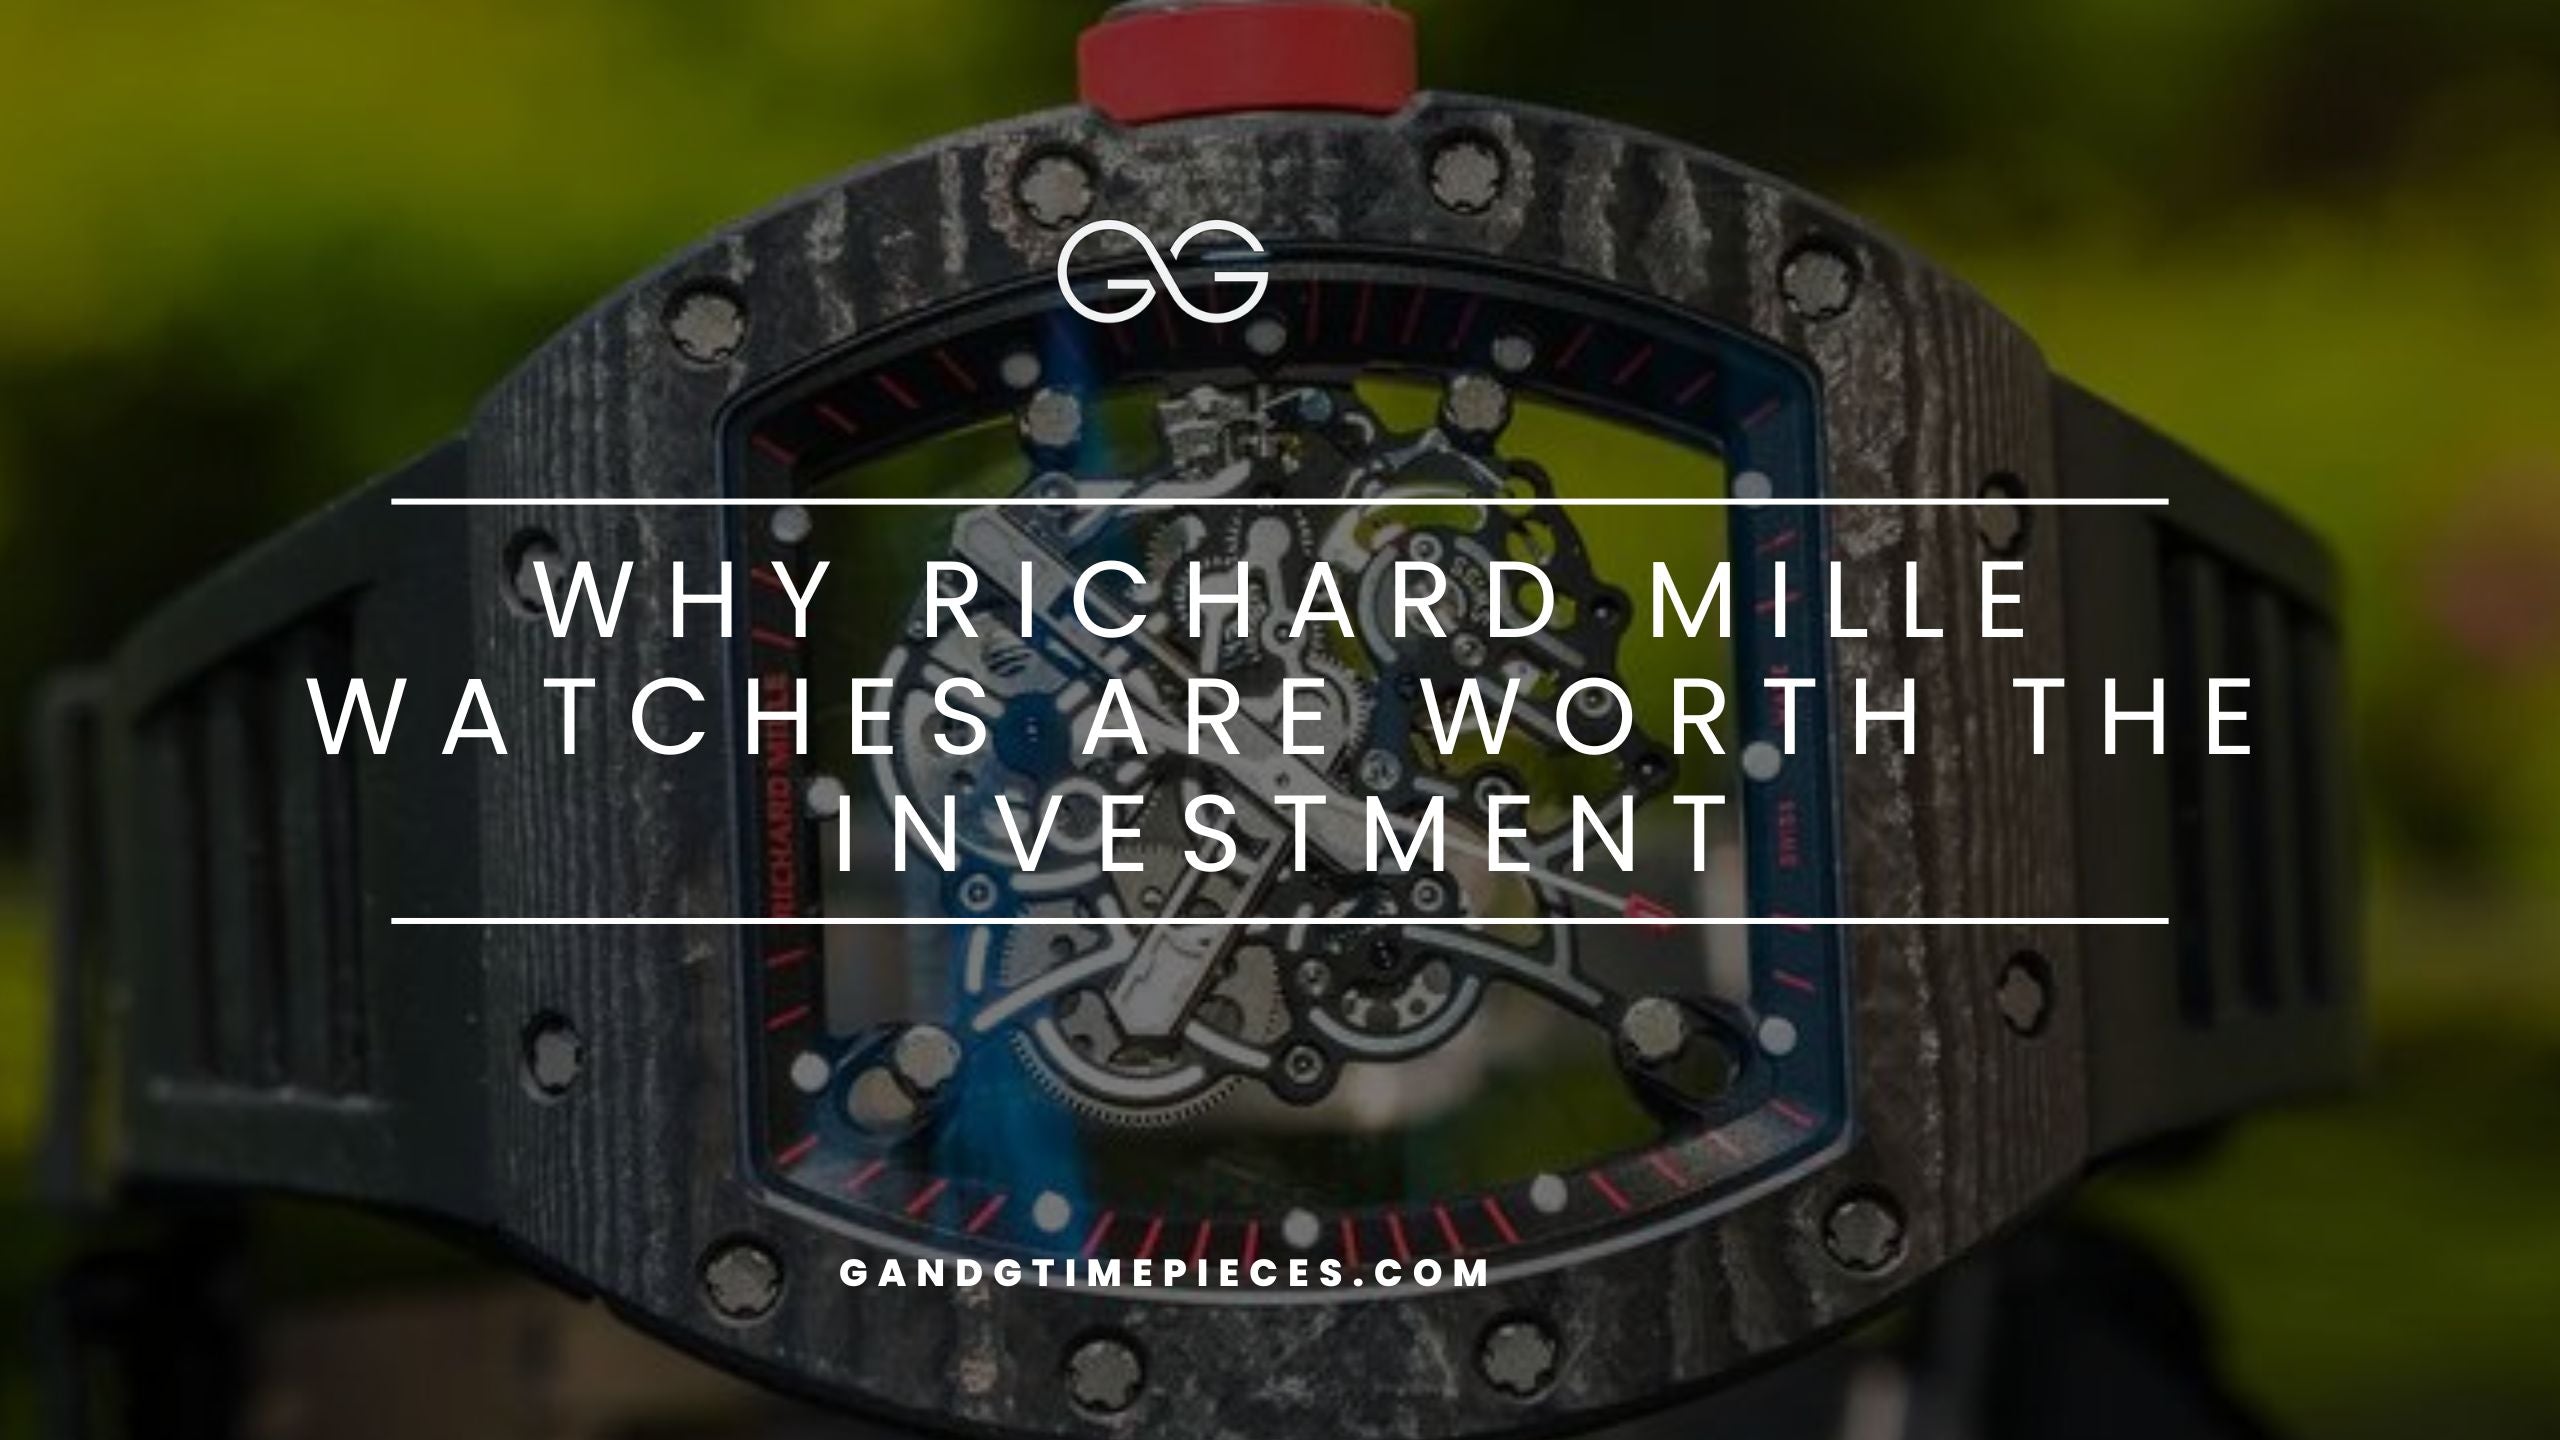 Why Richard Mille Watches are Worth the Investment